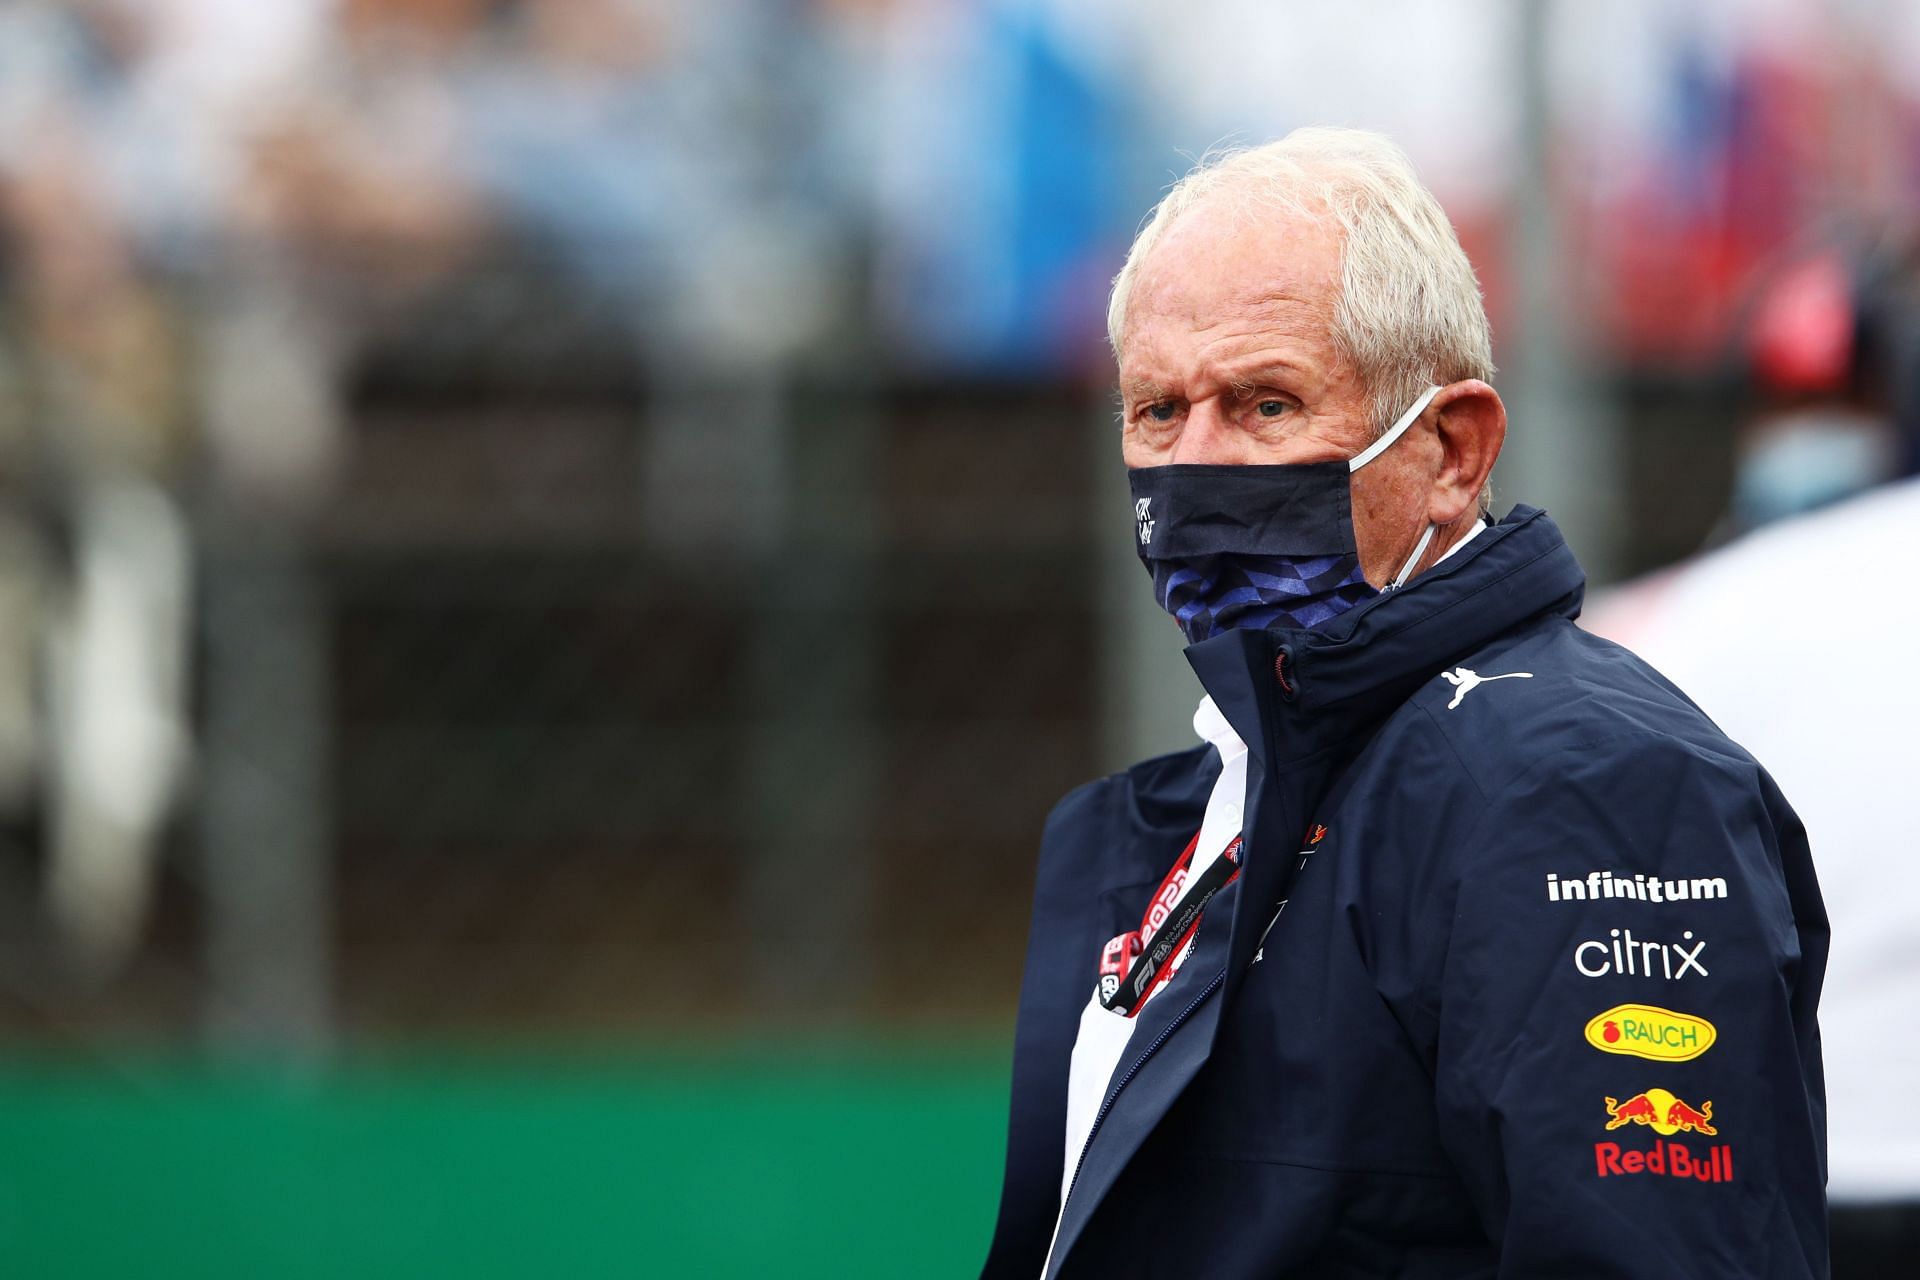 Helmut Marko has been overseeing the Red Bull driver development program since 1999